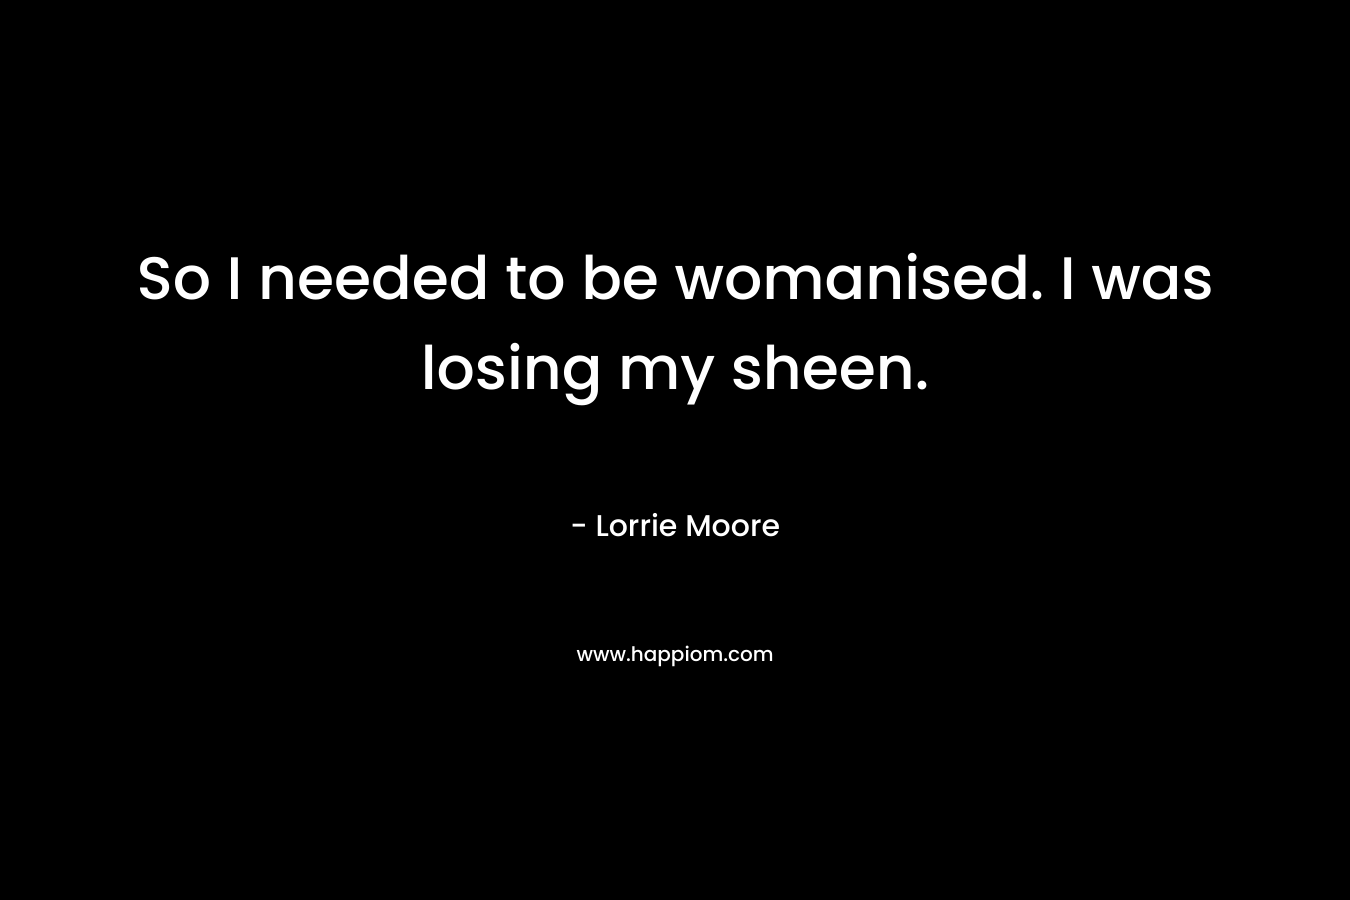 So I needed to be womanised. I was losing my sheen.